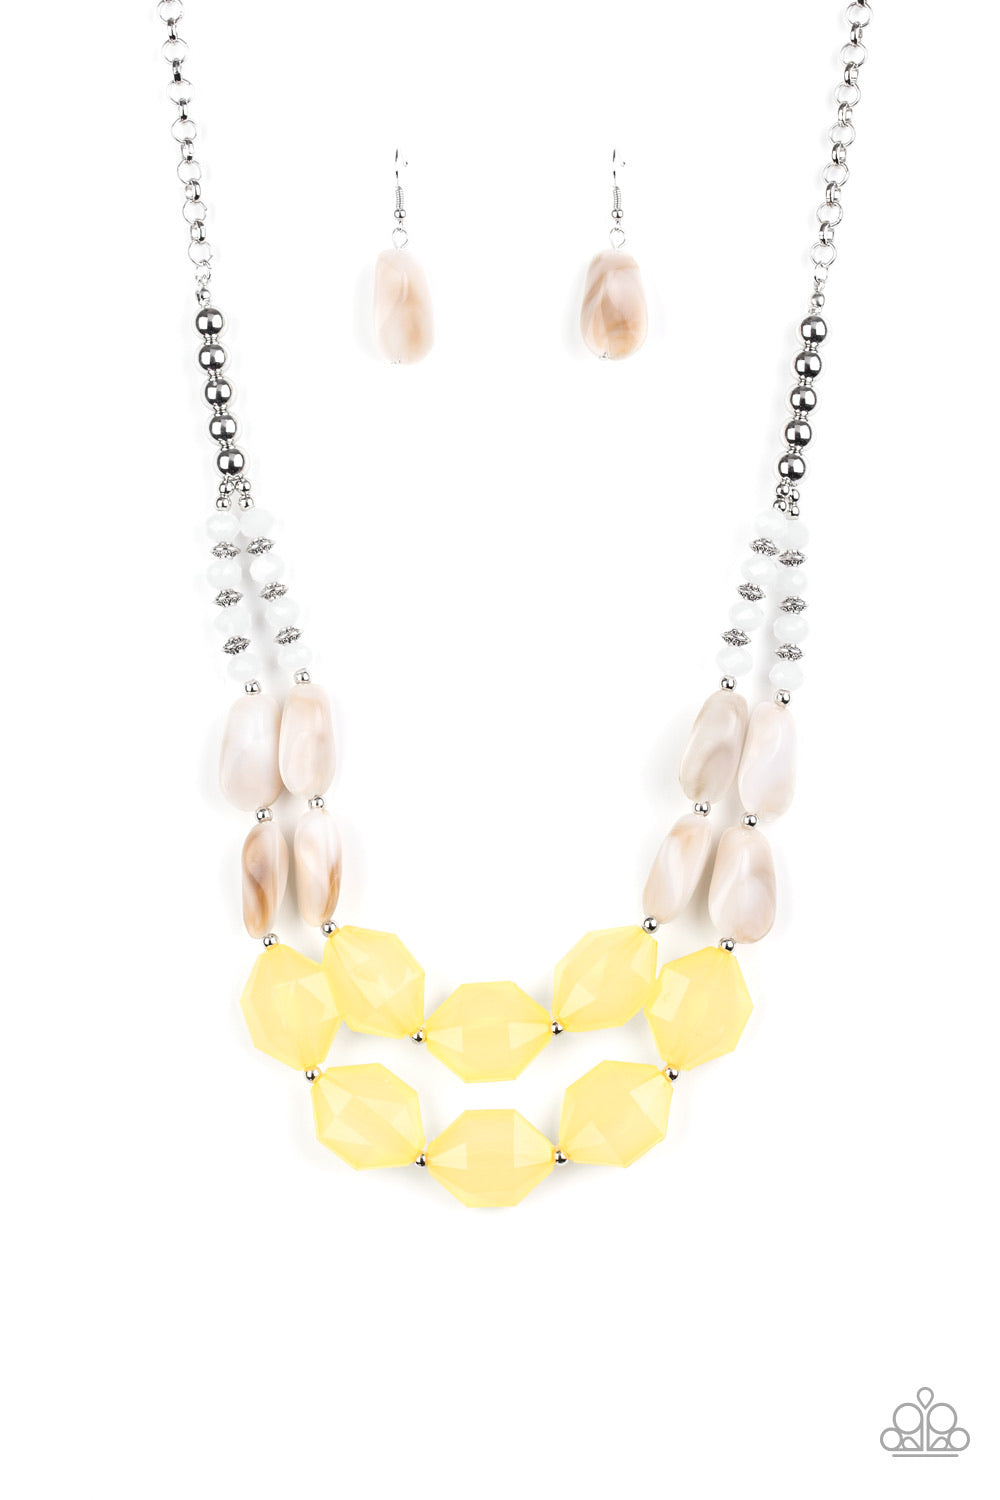 Paparazzi Necklaces - Seacoast Sunset - Yellow - Exclusive Summer Party Pack 2020